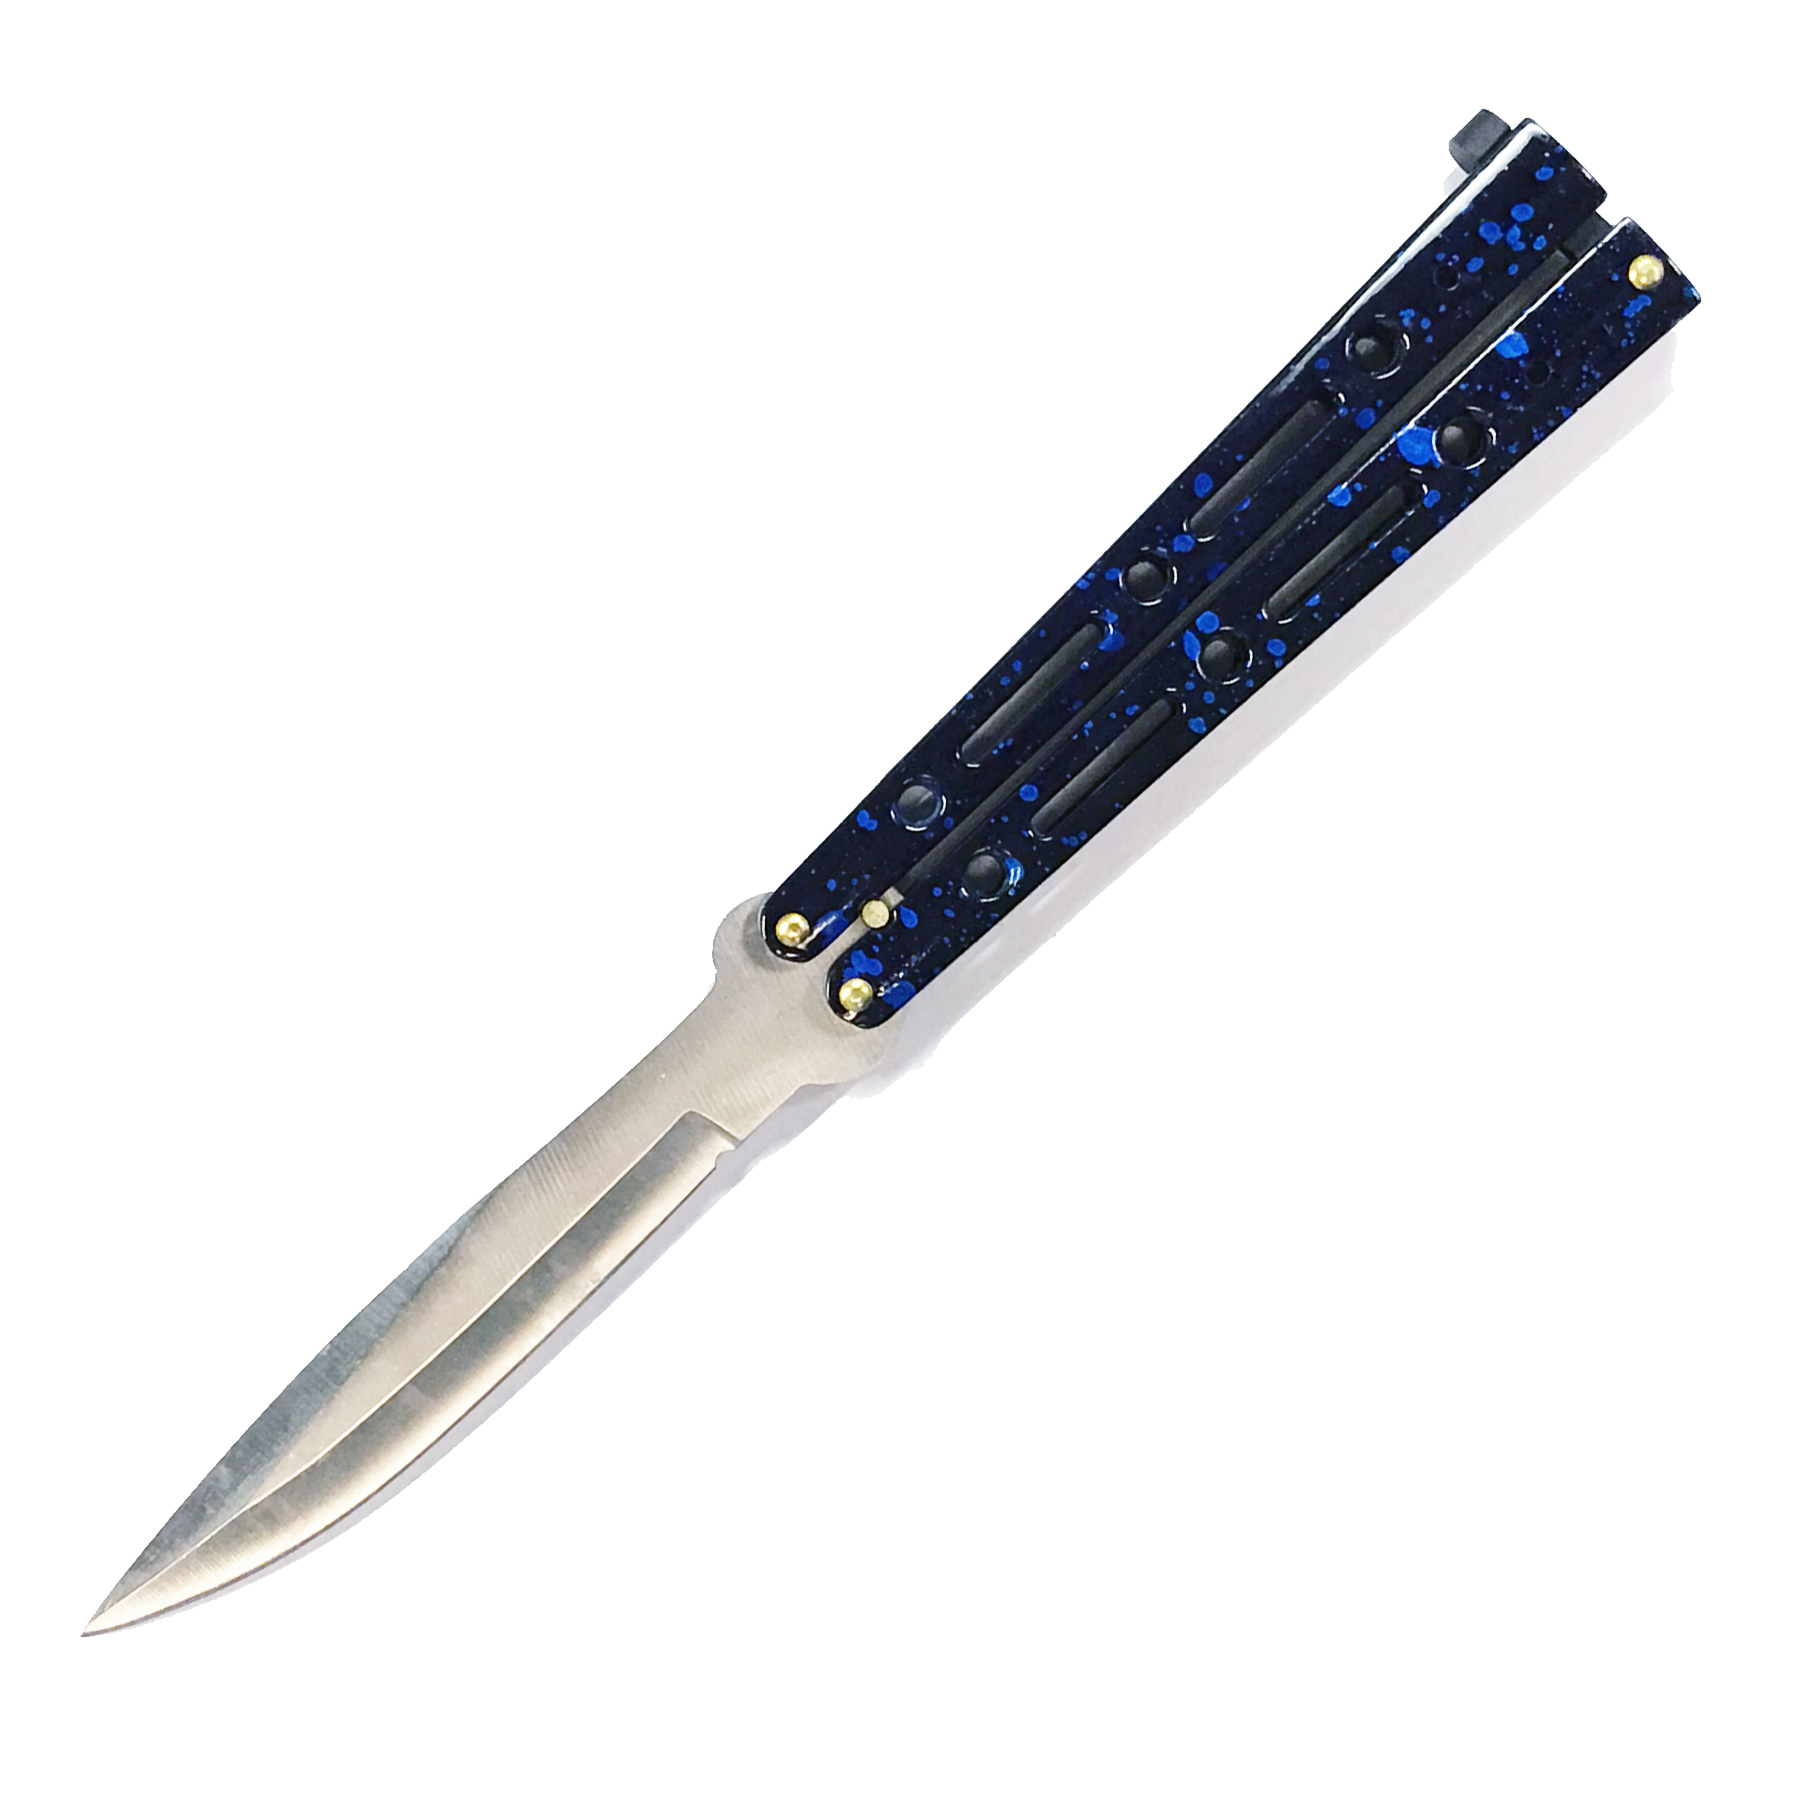 Giant Butterfly Balisong Knife 10in. Overall Length - Blue, Black